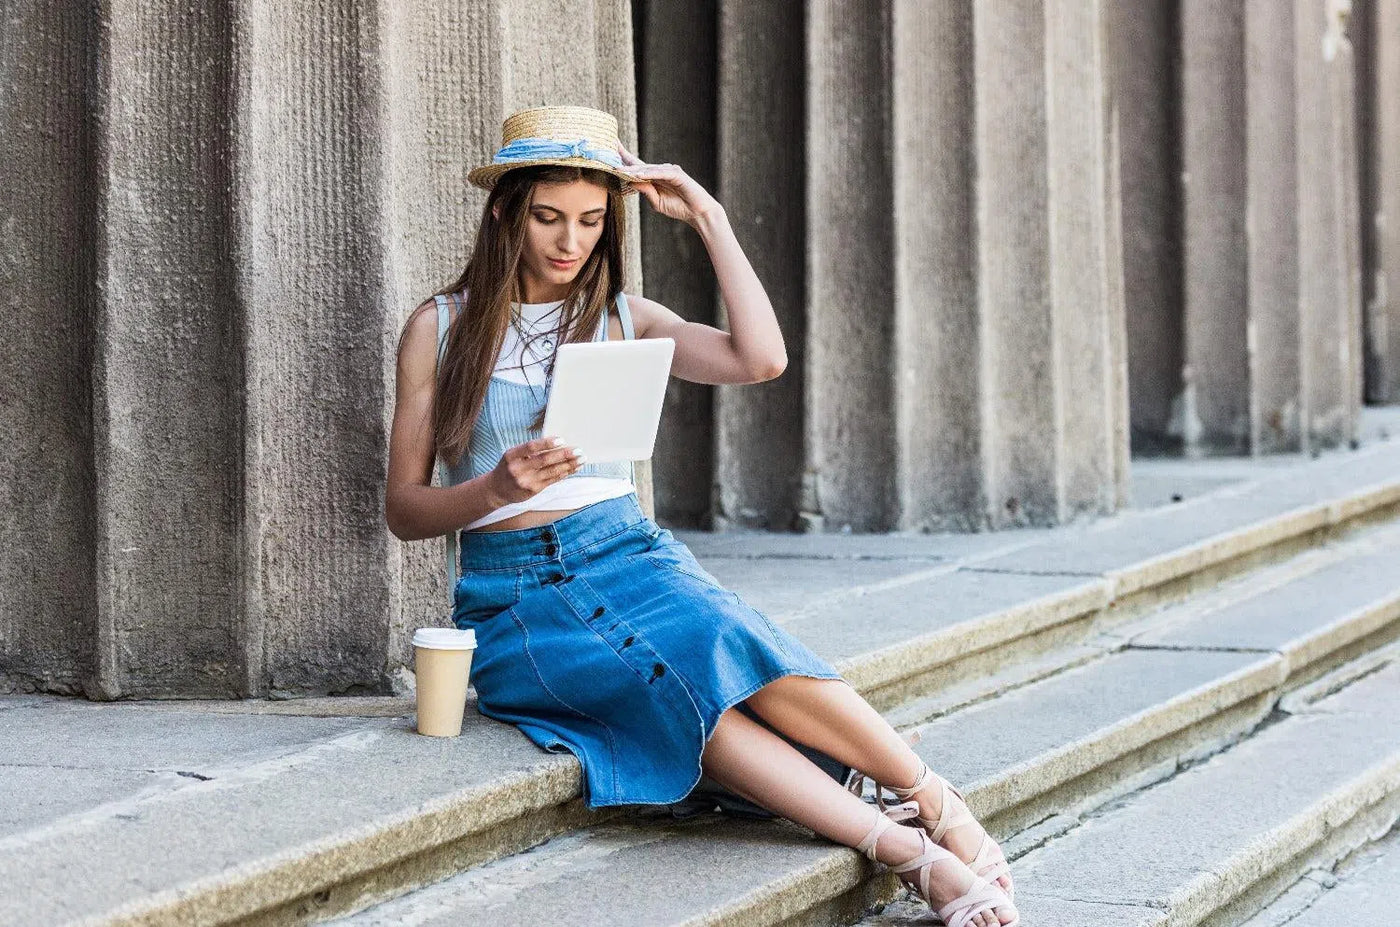 A women in long jean skirt sitting on stairs with a computer and a cup of coffee.